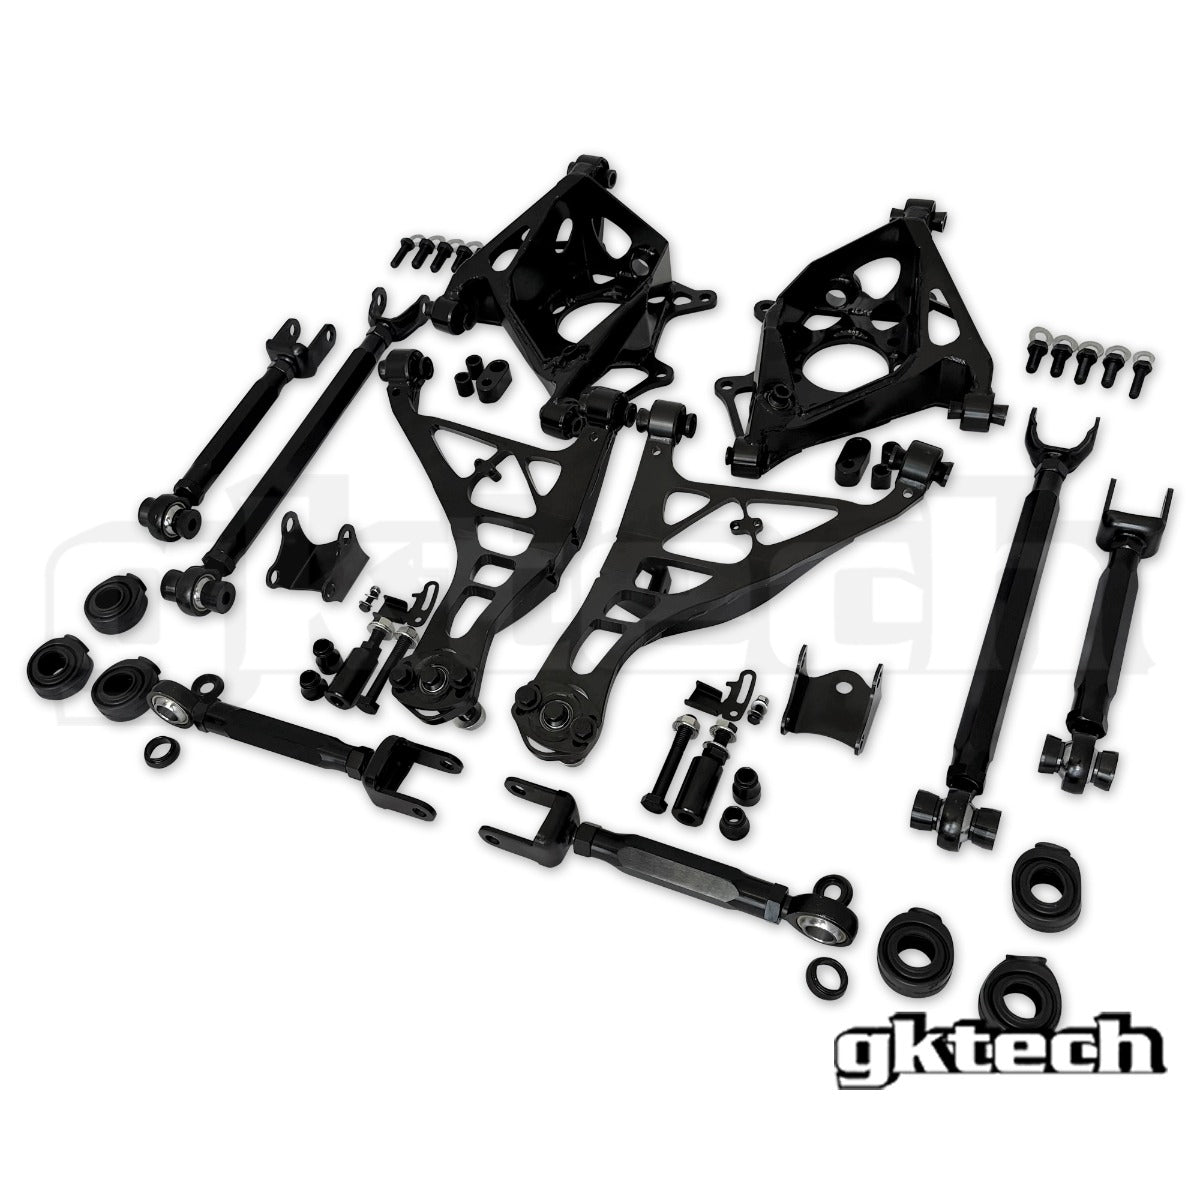 Z34 370Z/G37 rear suspension package (20% combo discount)